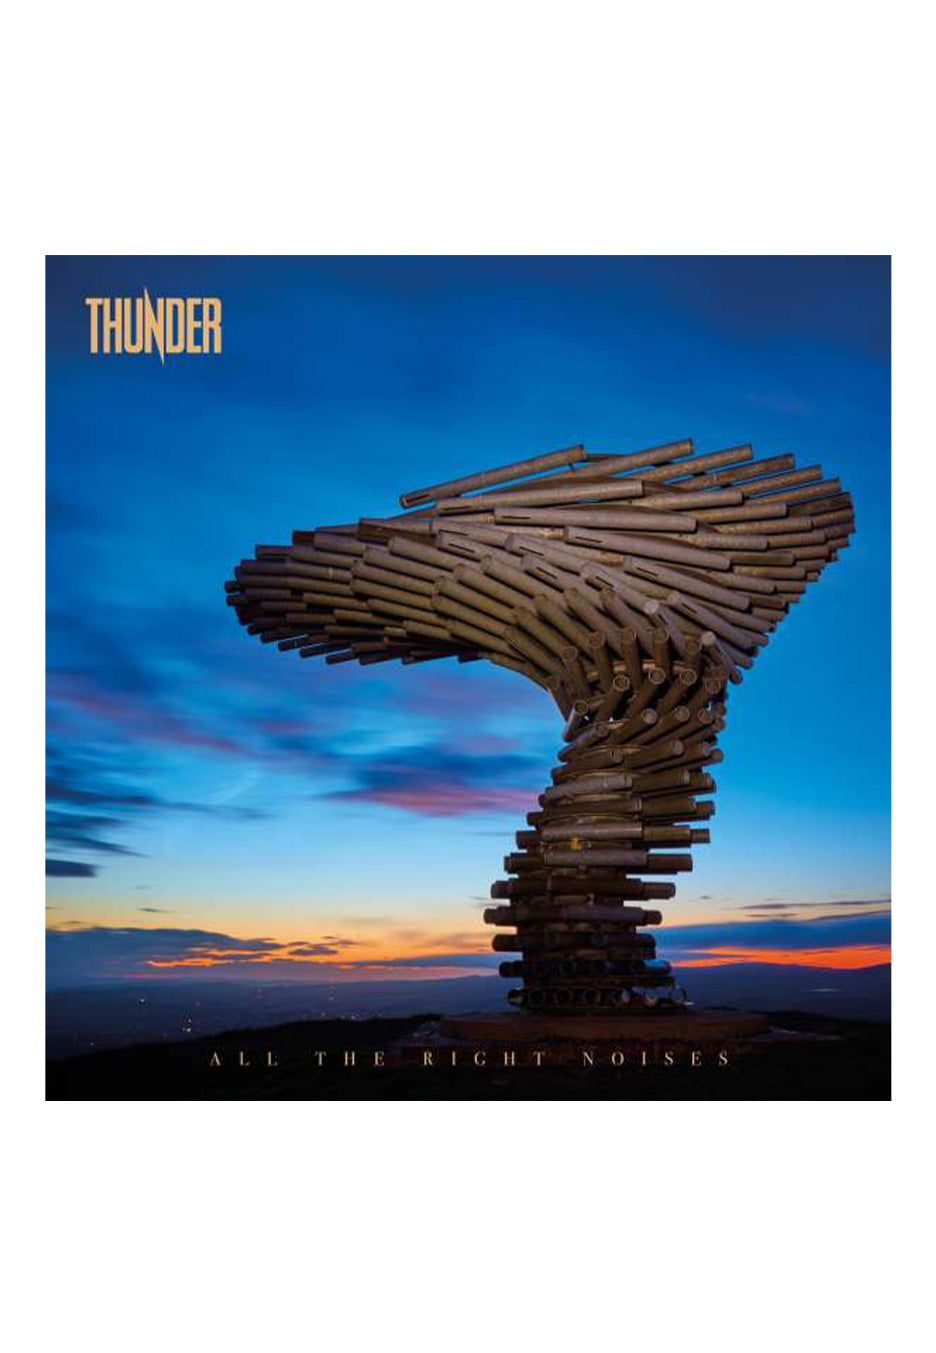 Thunder - All The Right Noises (Deluxe Edition) Orange/Blue Galaxy - Colored 2 Vinyl